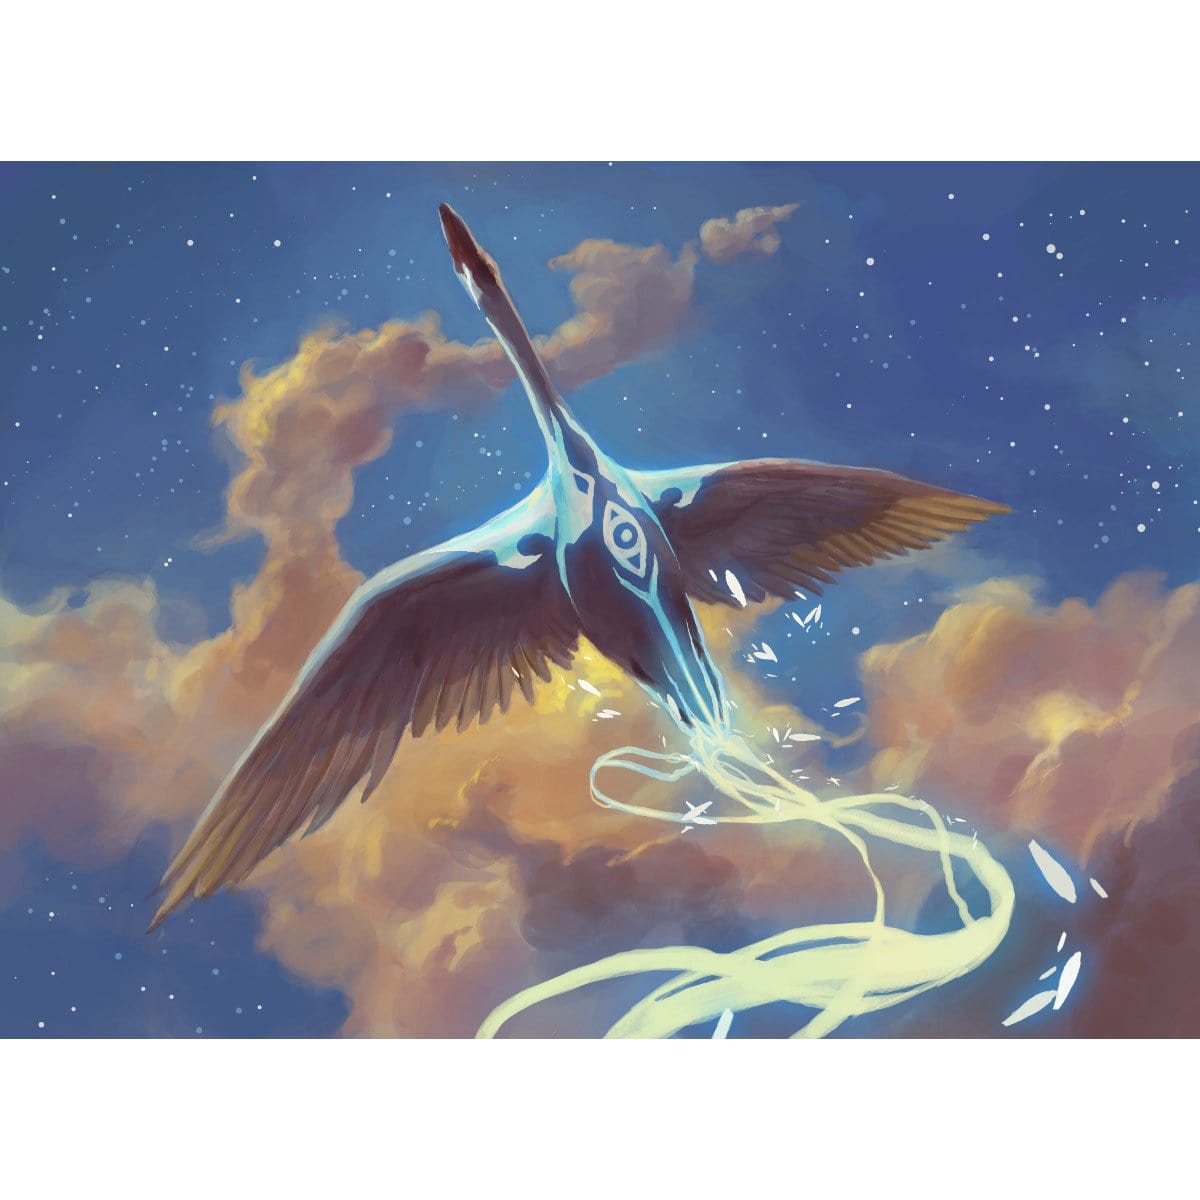 Swan Song Print - Print - Original Magic Art - Accessories for Magic the Gathering and other card games